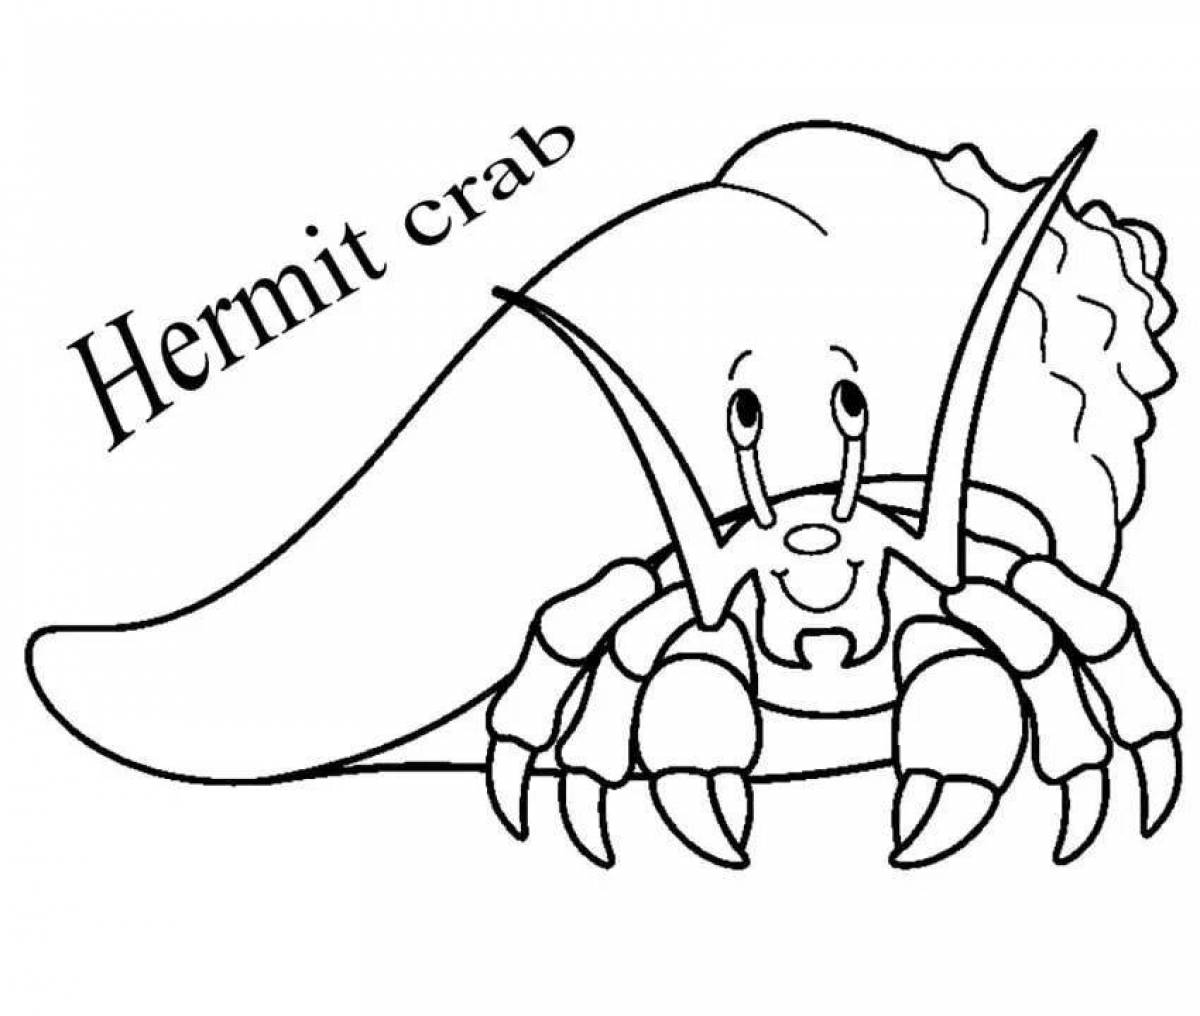 Colorful hermit crab coloring page